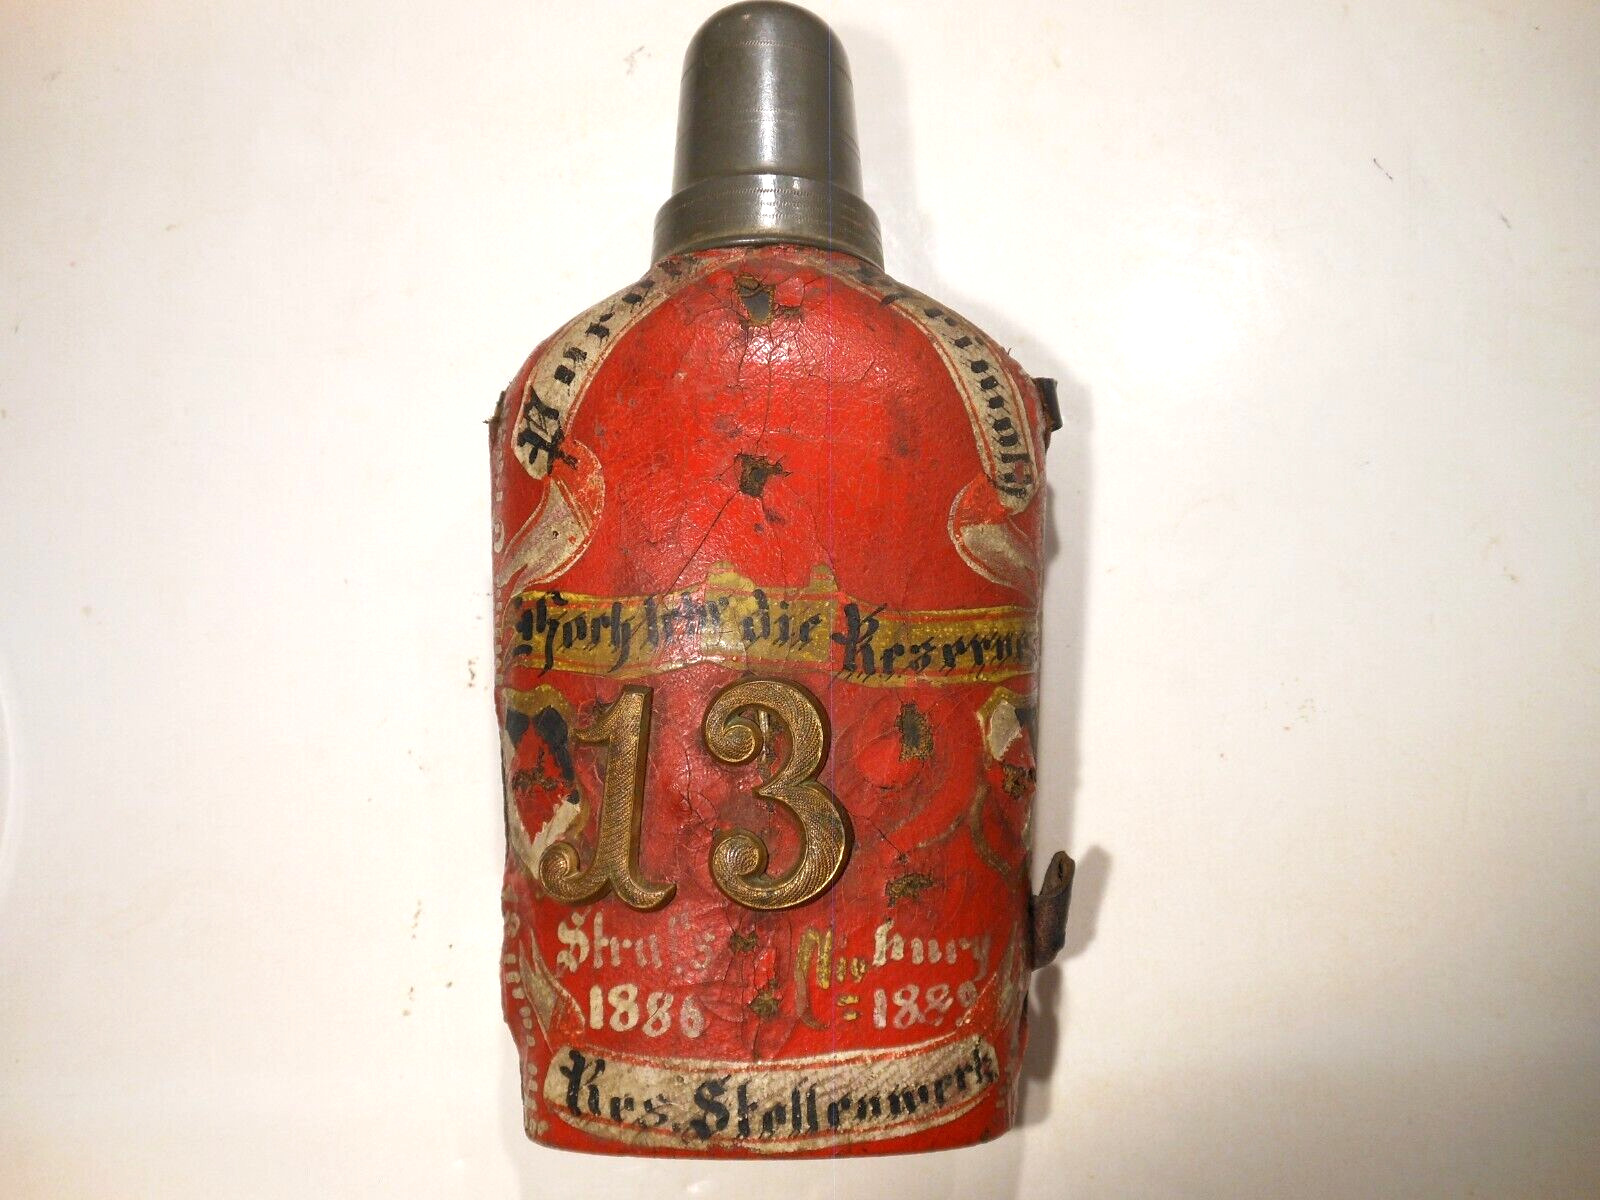 Rare Prussian Infantry Water Flask Canteen Service Bottle Original 1886 Army